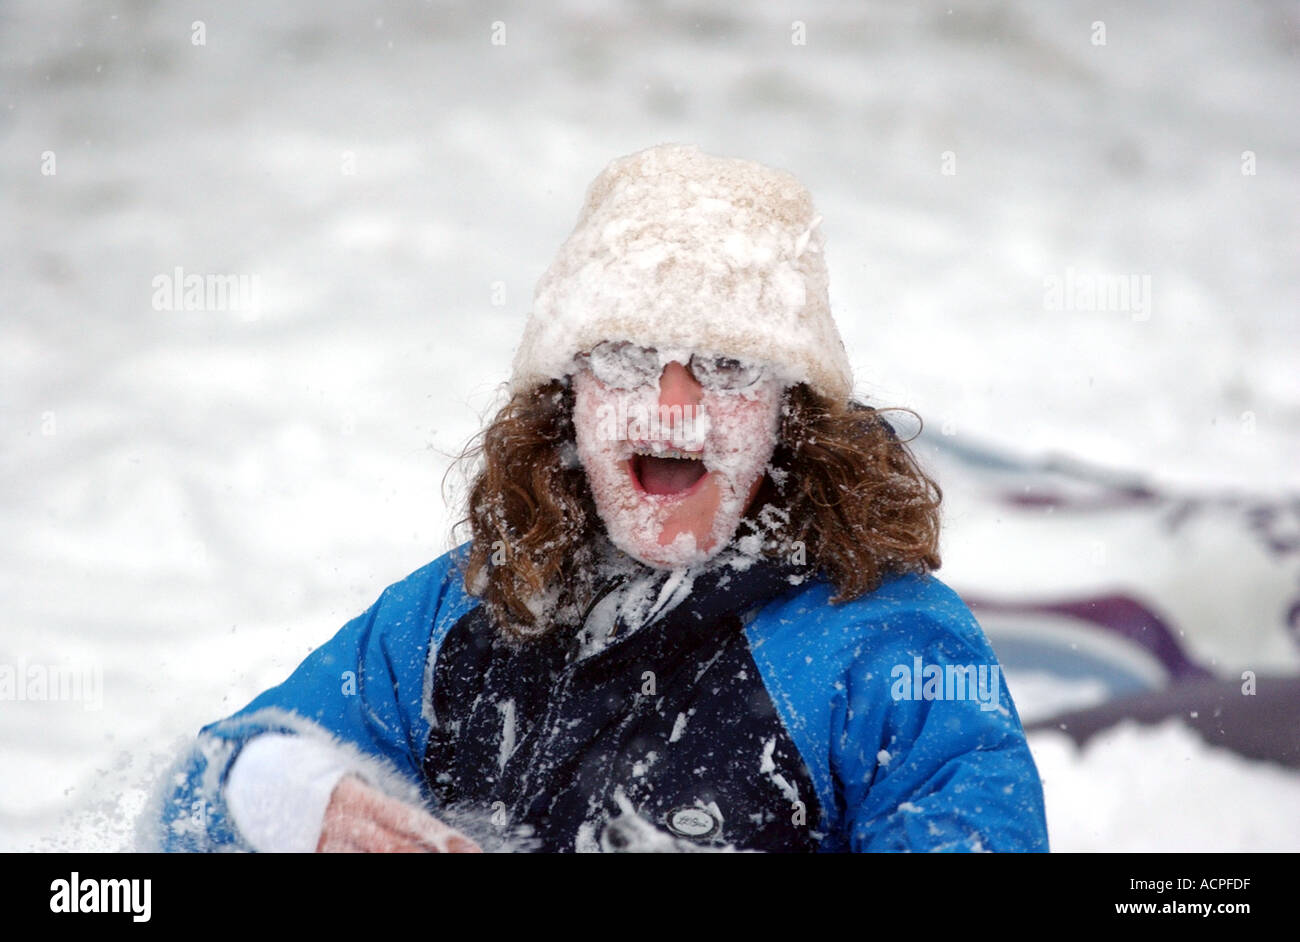 Funny kid picture girl with face covered in snow after being hit by snowball Stock Photo